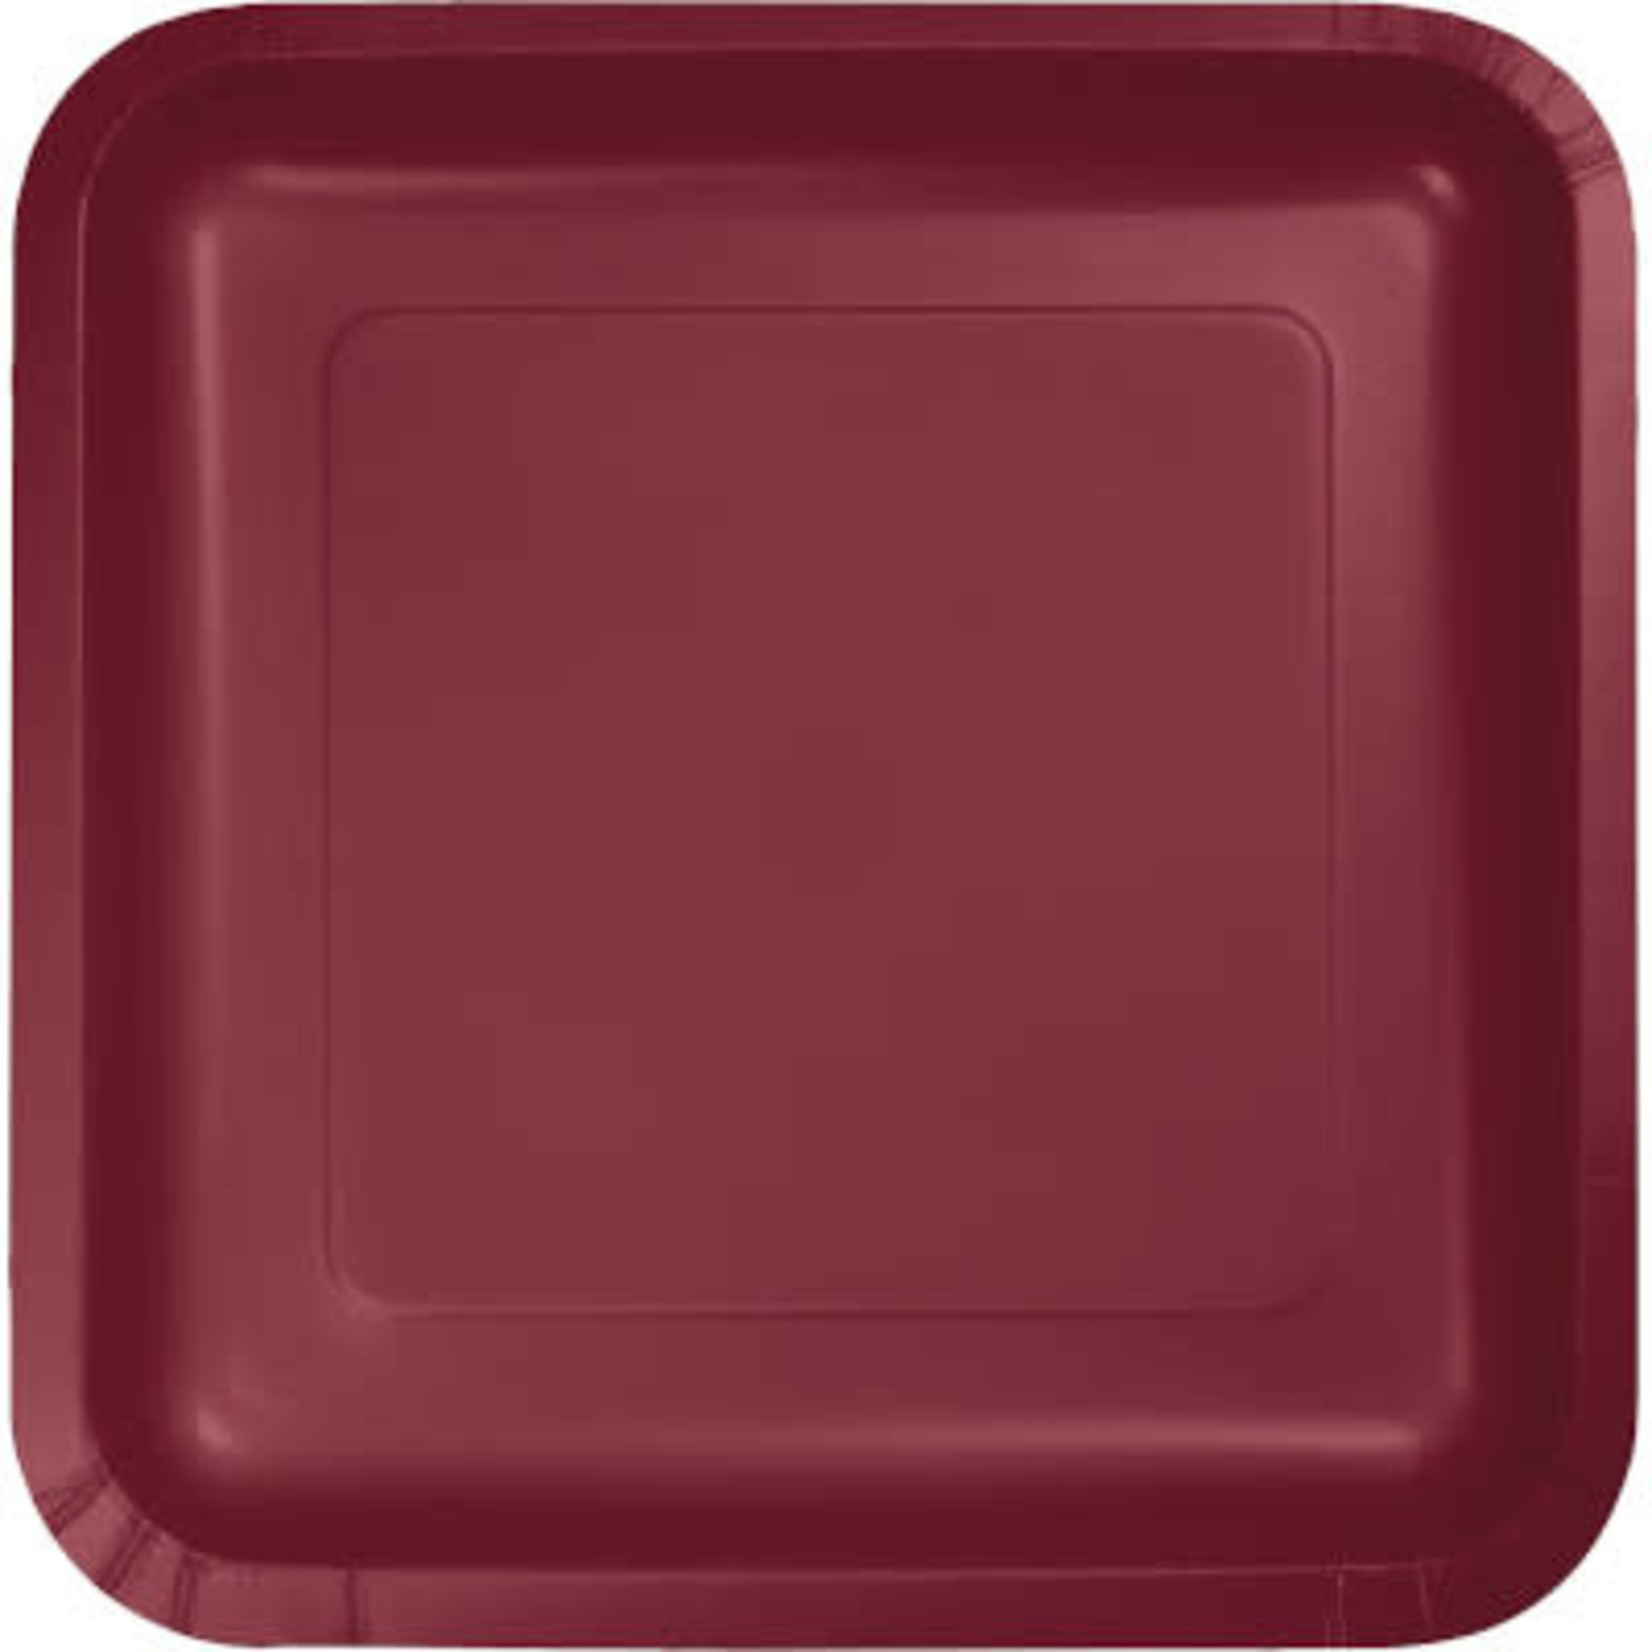 Touch of Color 9" Burgundy Square Paper Plates - 18ct.